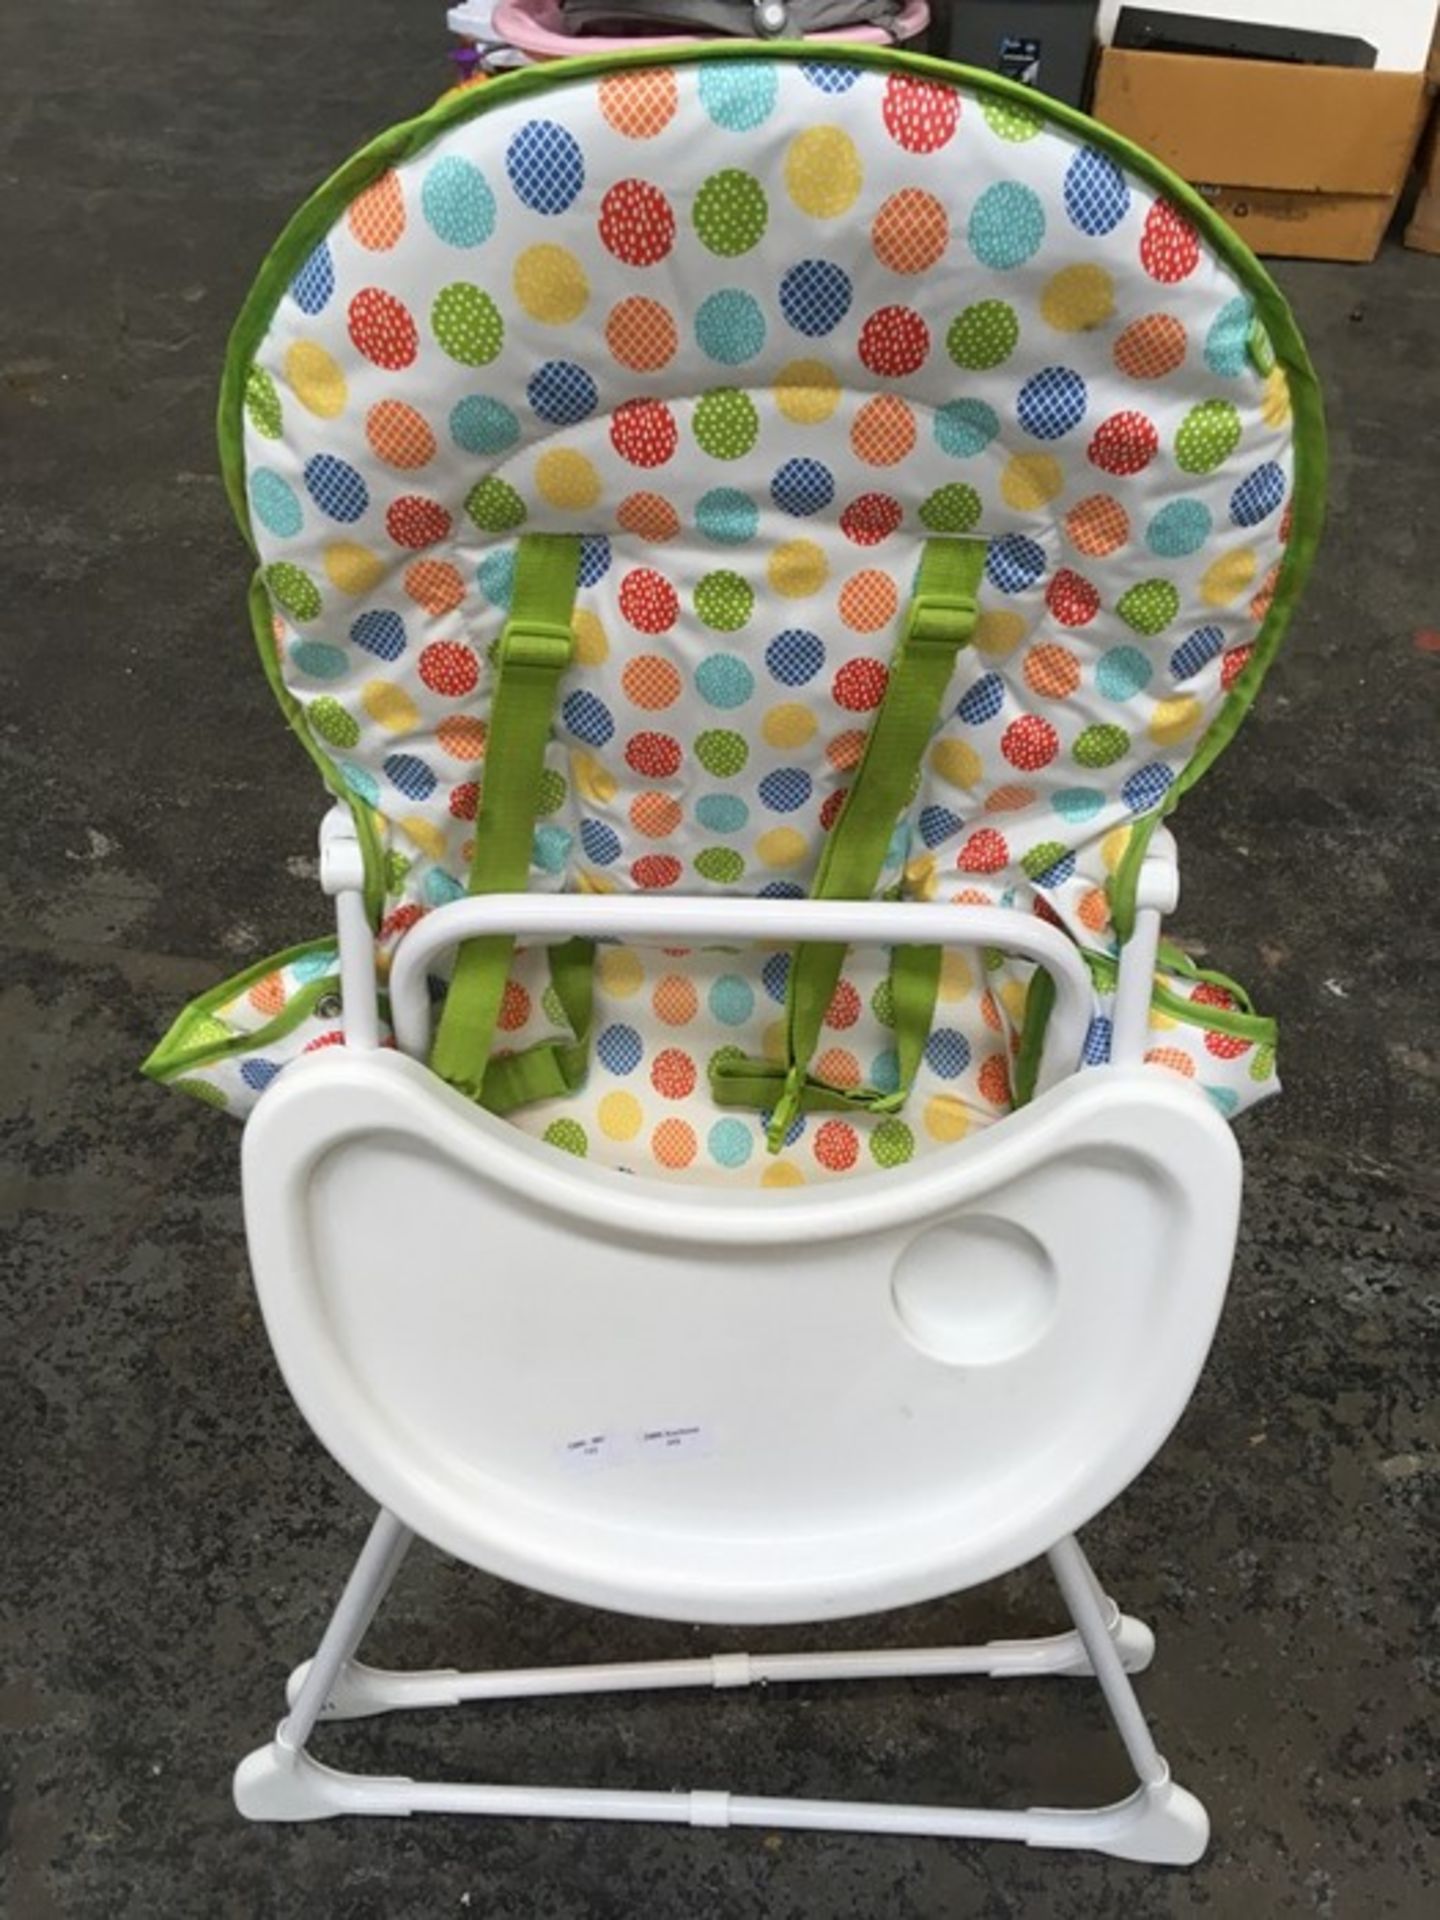 1 MOTHERCARE HIGH CHAIR WITH MULTI-COLOURED DOTS / RRP £55.00 (PUBLIC VIEWING AVAILABLE)